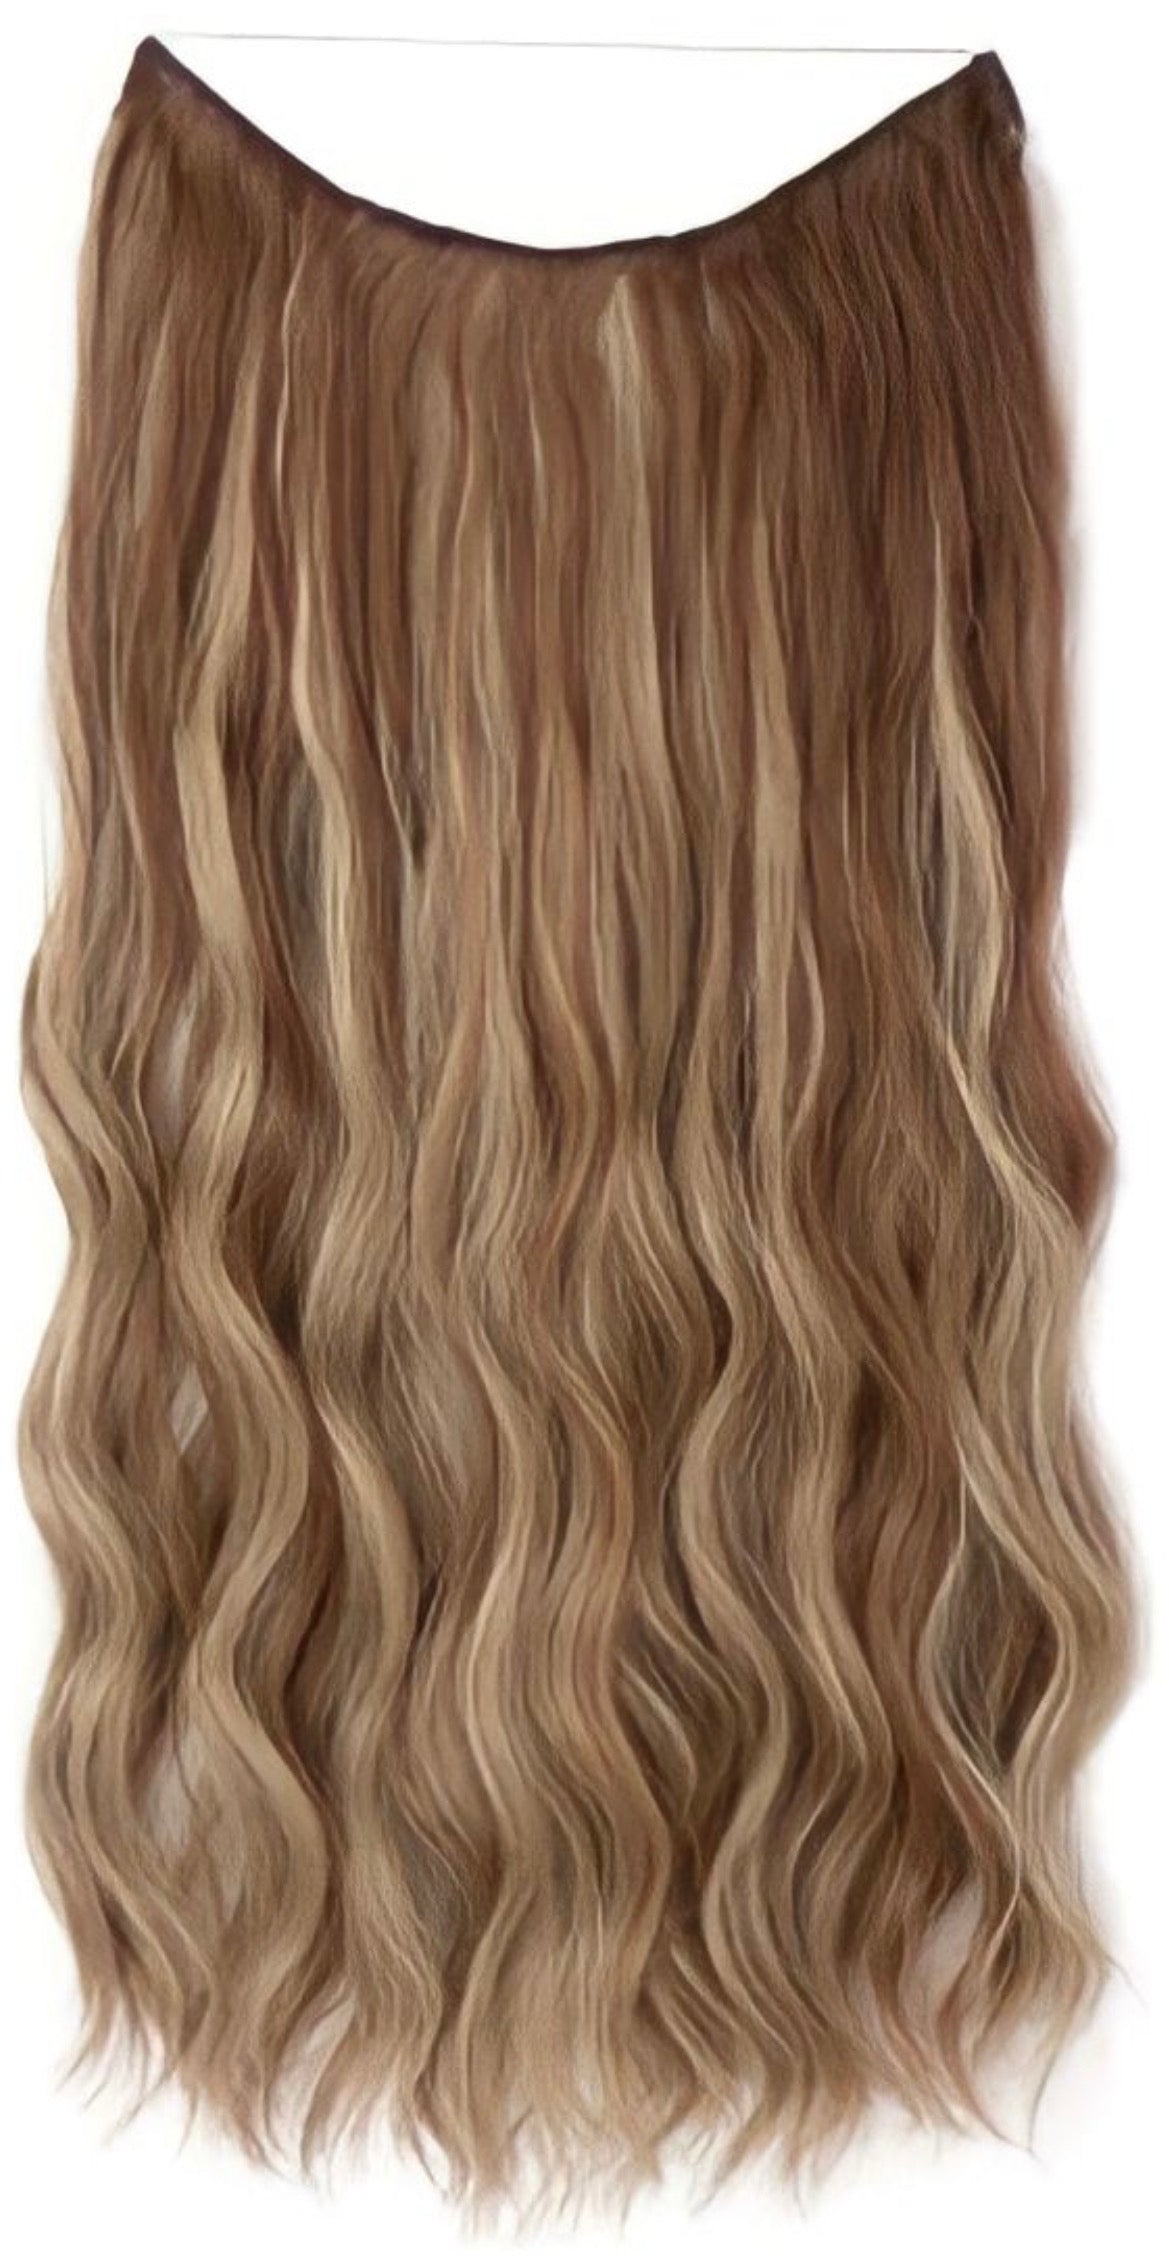 Halo Hair Extension Synthetic Hair